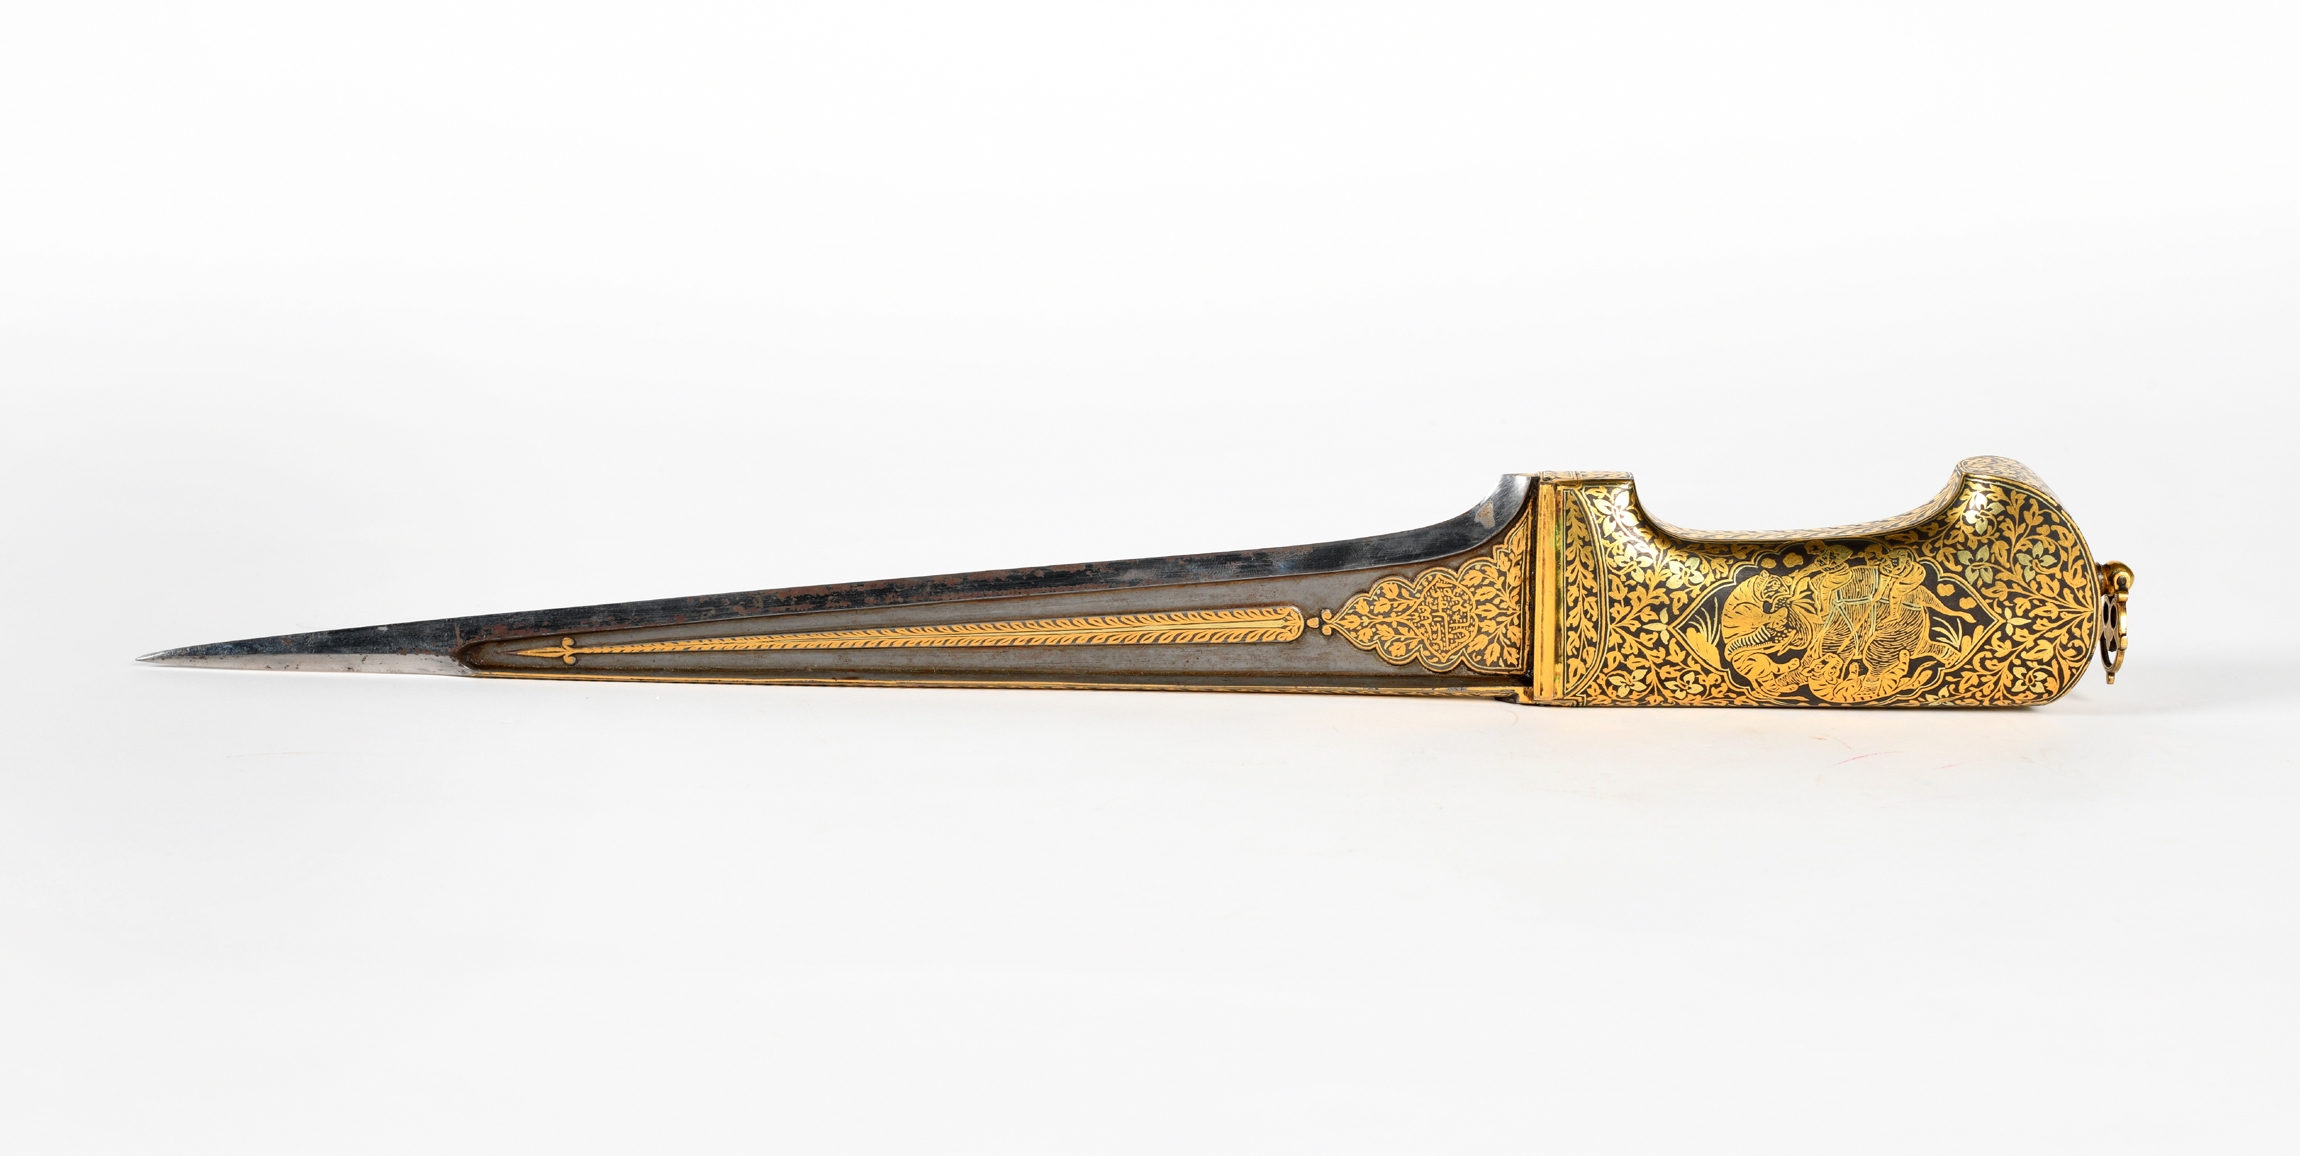 Peshqabz dagger, watered steel damascened in gold with floral design and depiction of hunting of tigers on either side of the hilt, 17th-18th Century CE, India.jpg